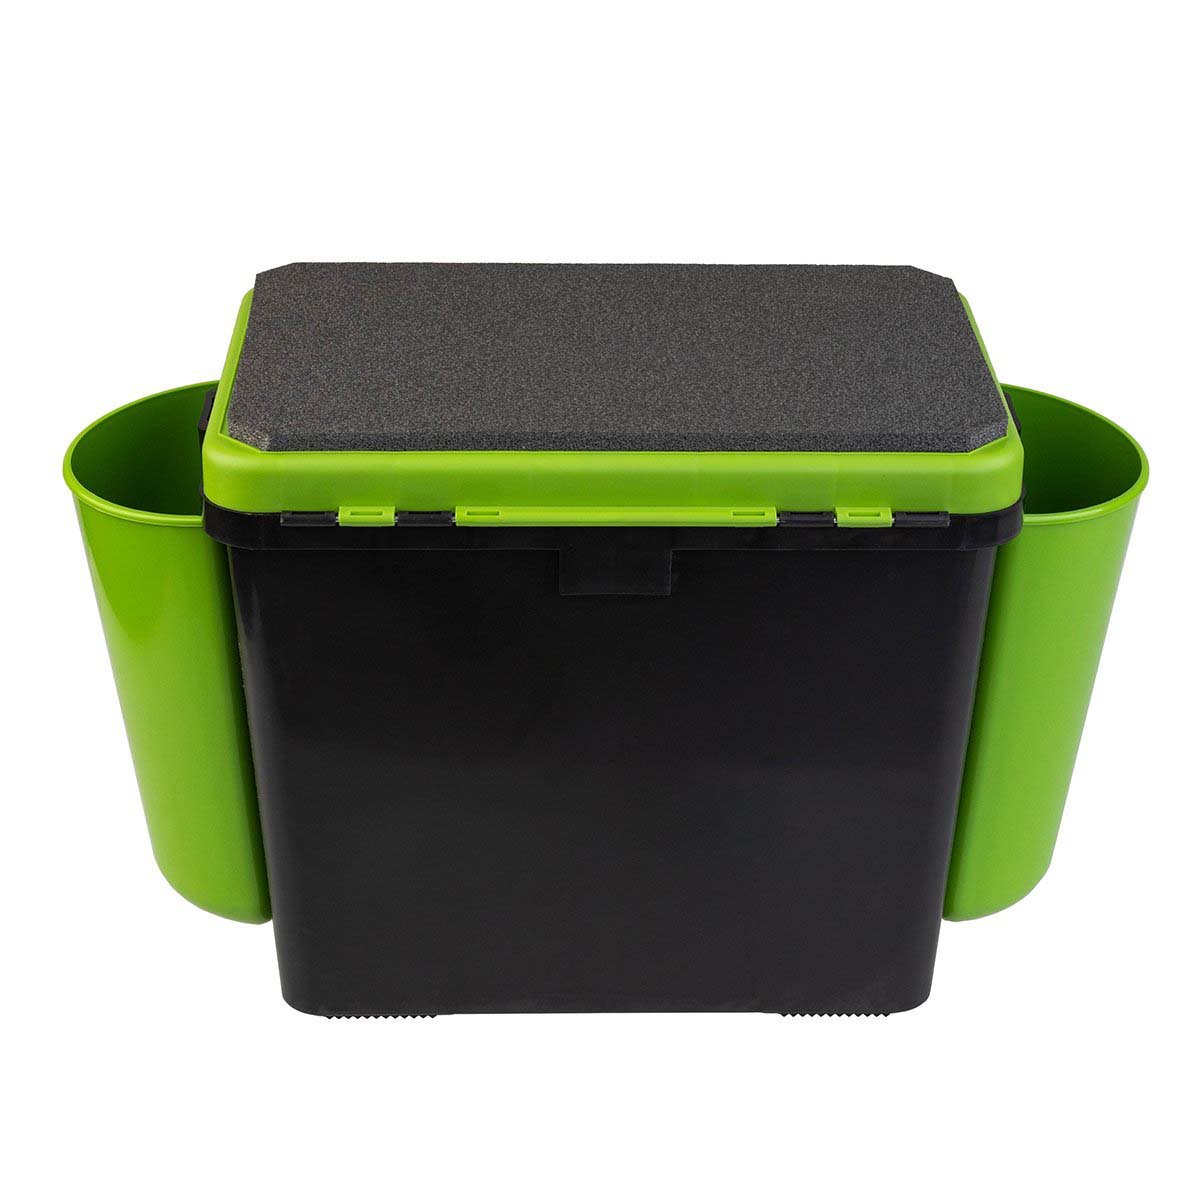 FishBox Large 5 gal SeatBox for Ice Fishing Tackle and Gear, green